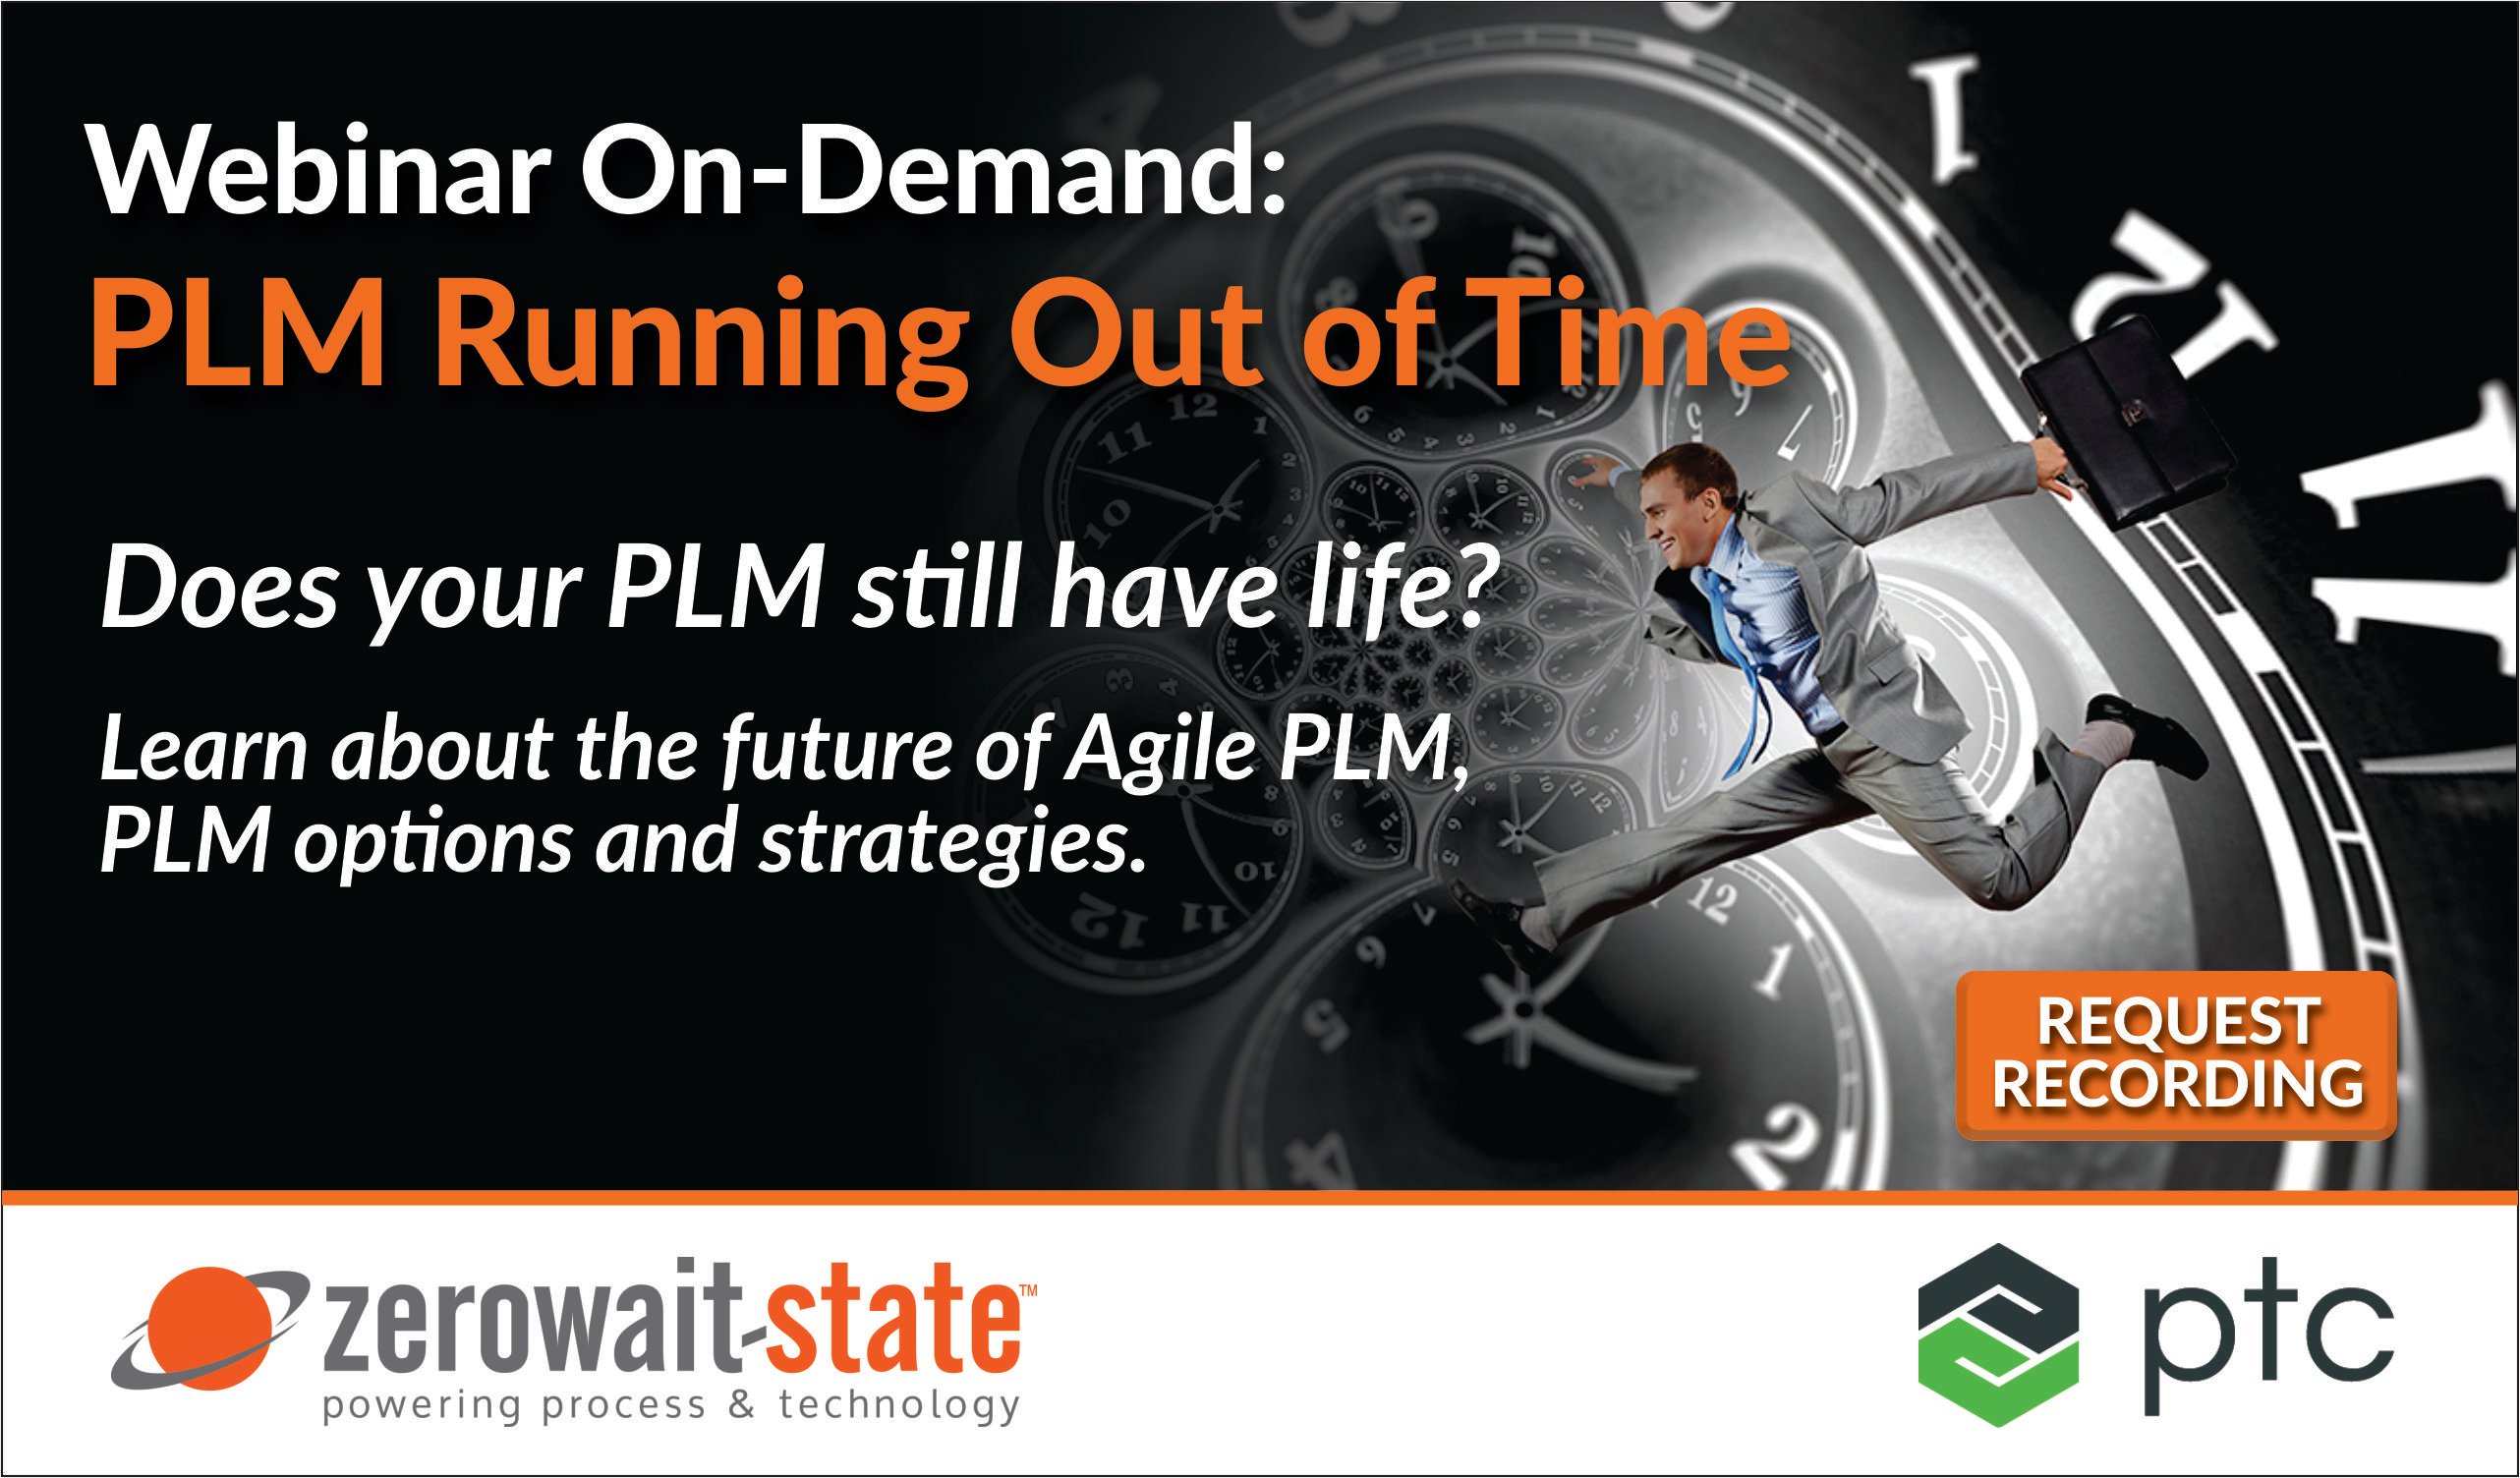 IS YOUR PLM RUNNING OUT OF TIME